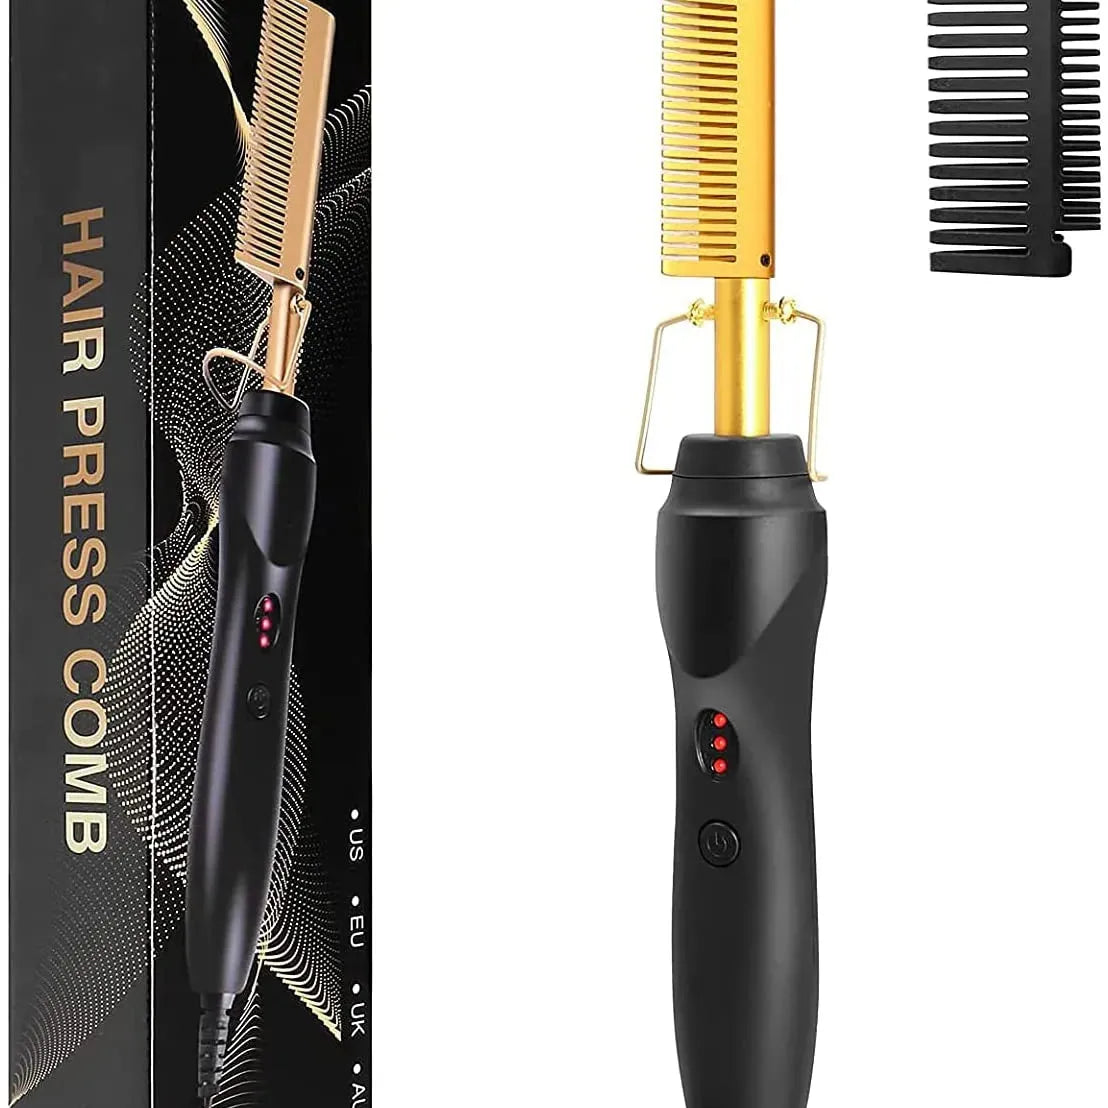 2 in1 Hot Comb Hair Straightener Electric Heating Comb Fast Heating Portable Travel Anti-Scald Beard Straightener Press Comb